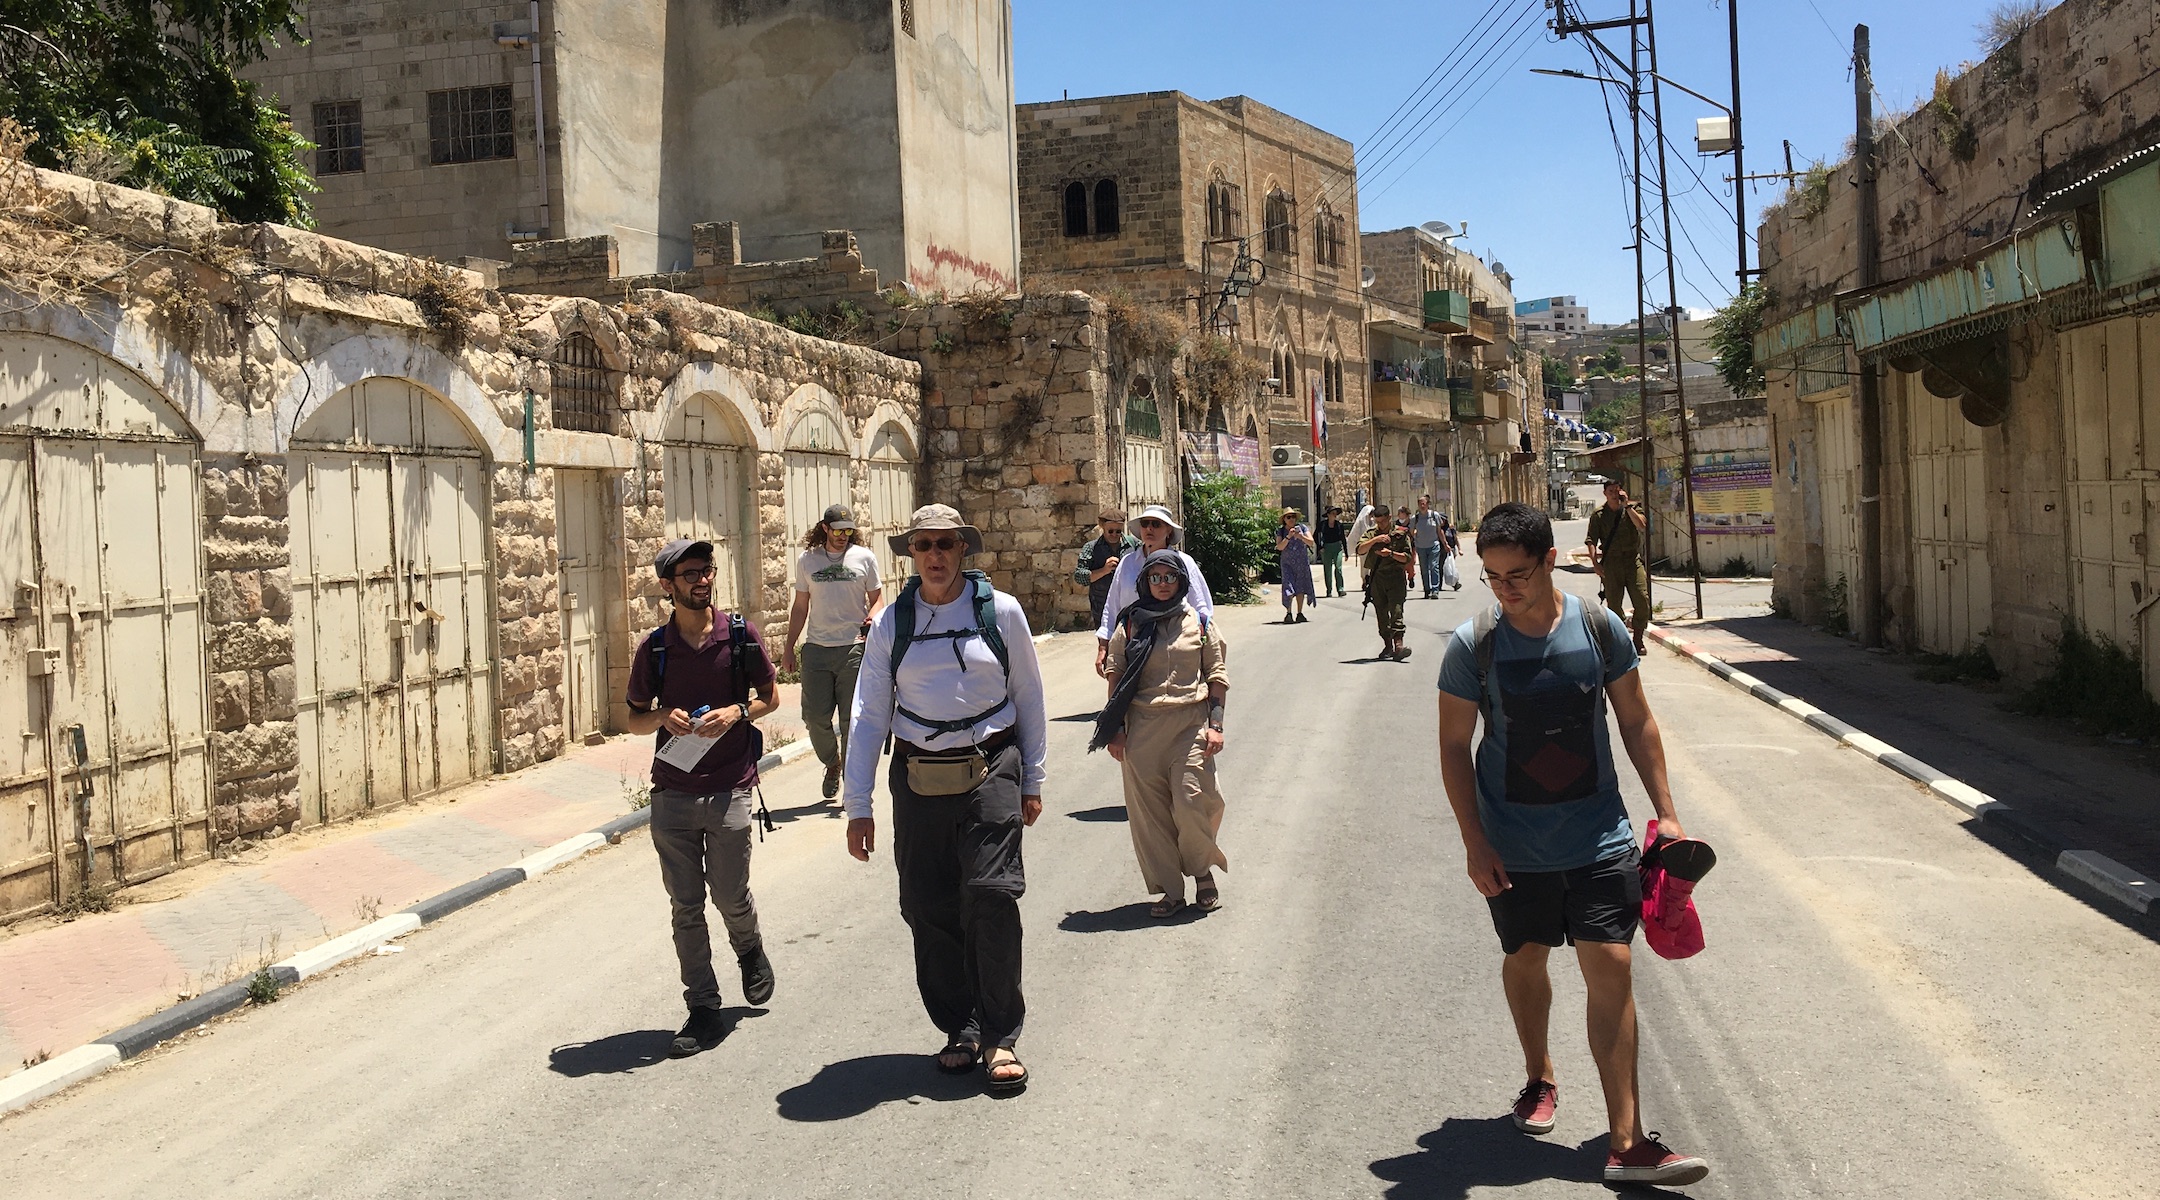 Participants on a recent tour of Israel and the West Bank, which included members of Pittsburgh's Congregation Dor Hadash, walk through Hebron. (Courtesy of Shleimut)